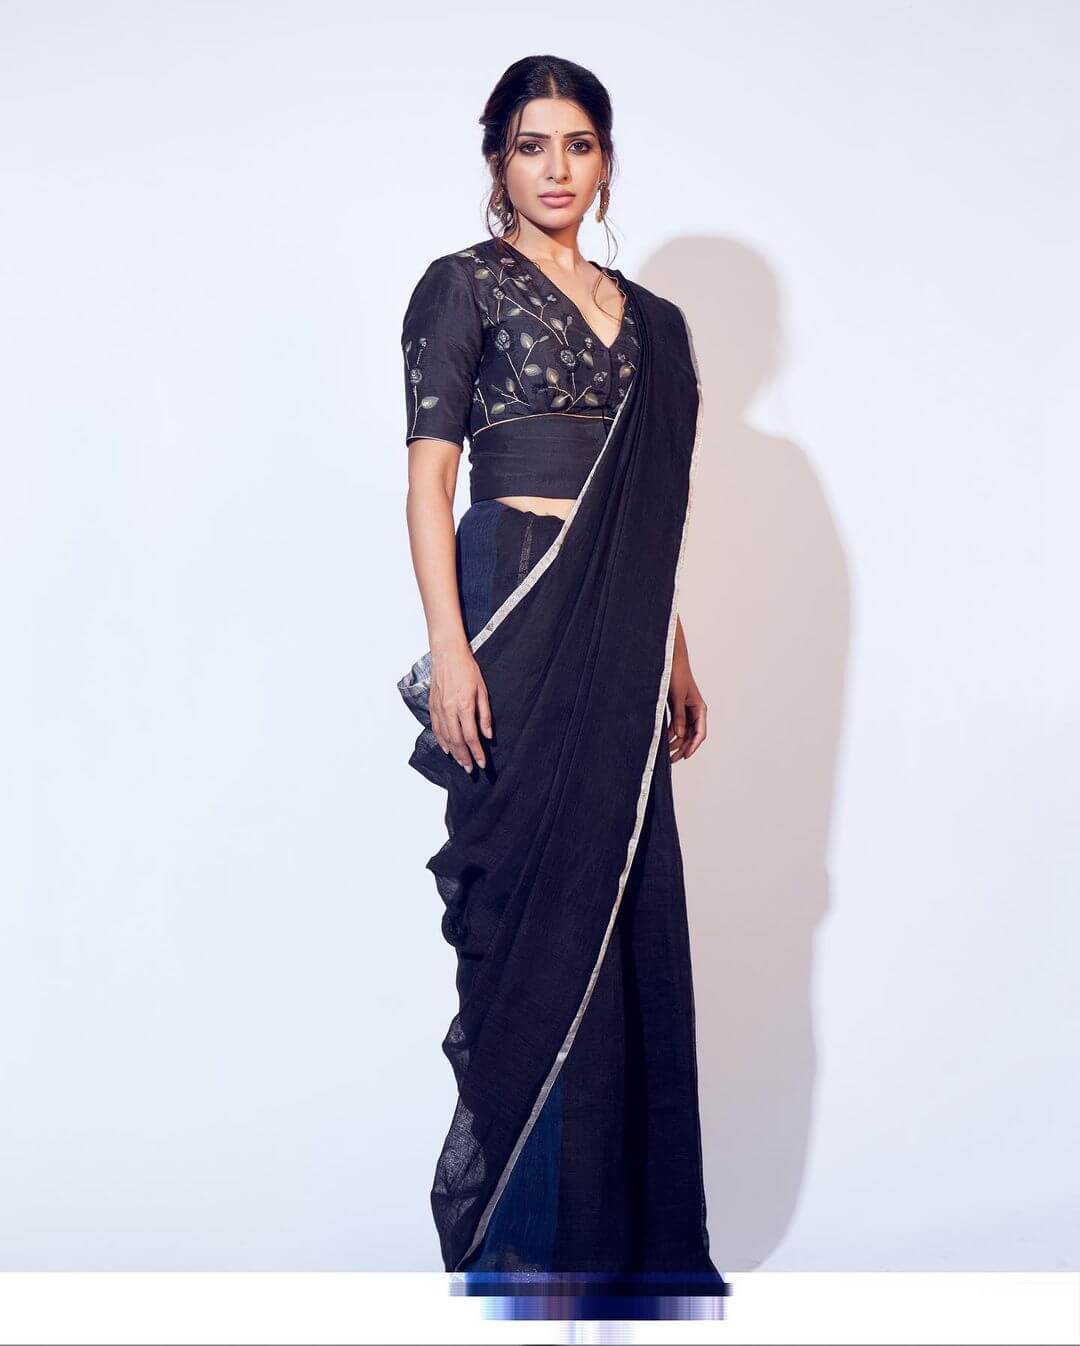 For Jannu Telugu Movie Promotion, Actress Samantha In Navy Color Saree